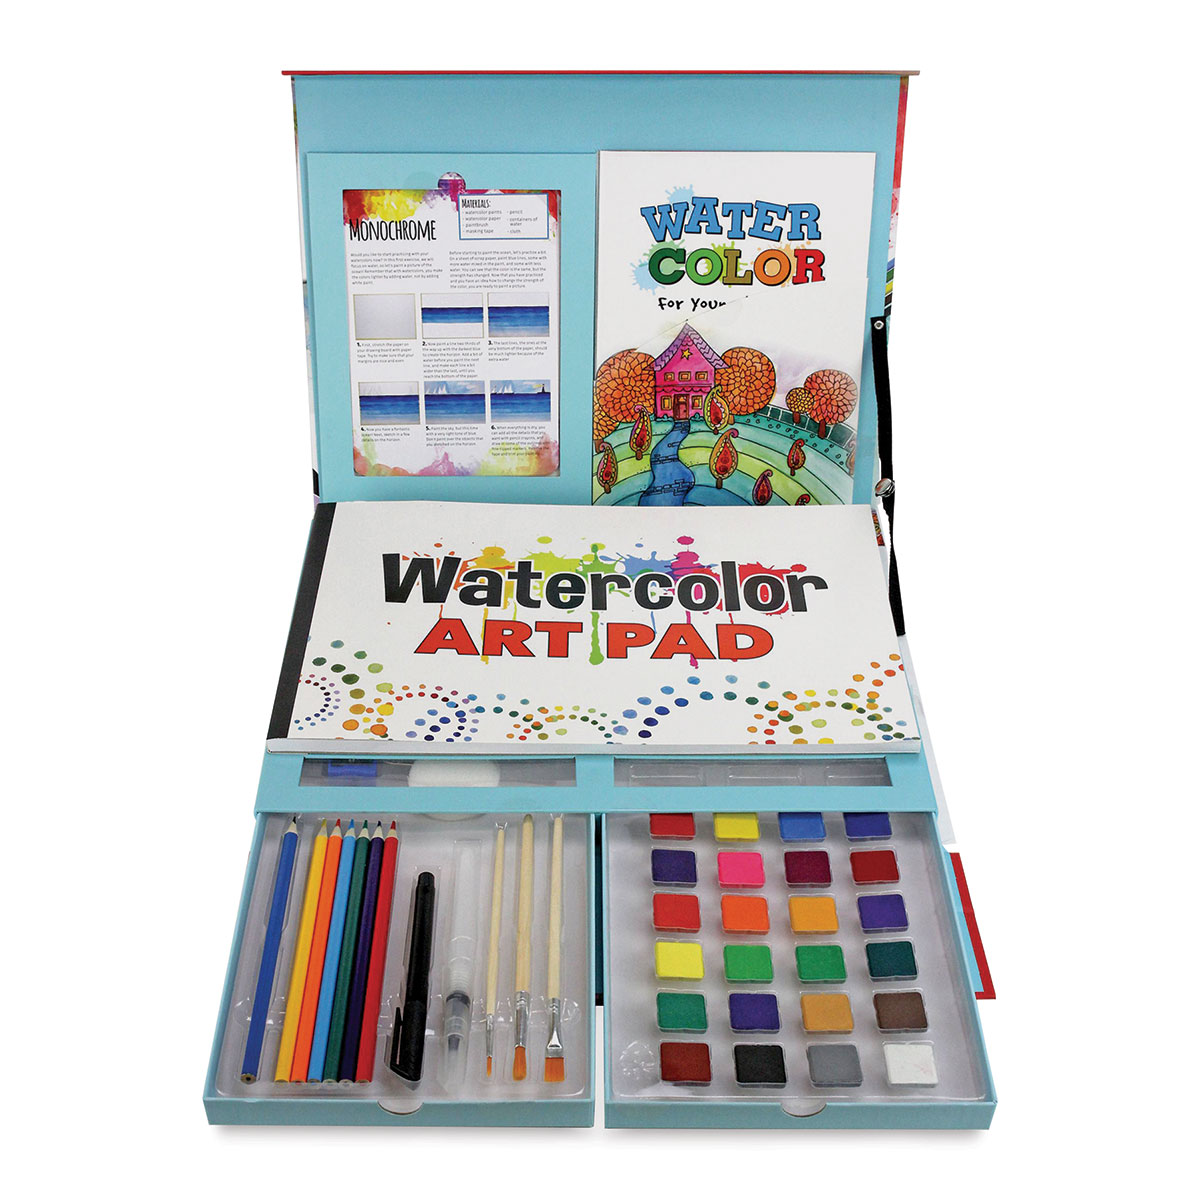  SpiceBox Watercolor Book and Painting Set, Learn How